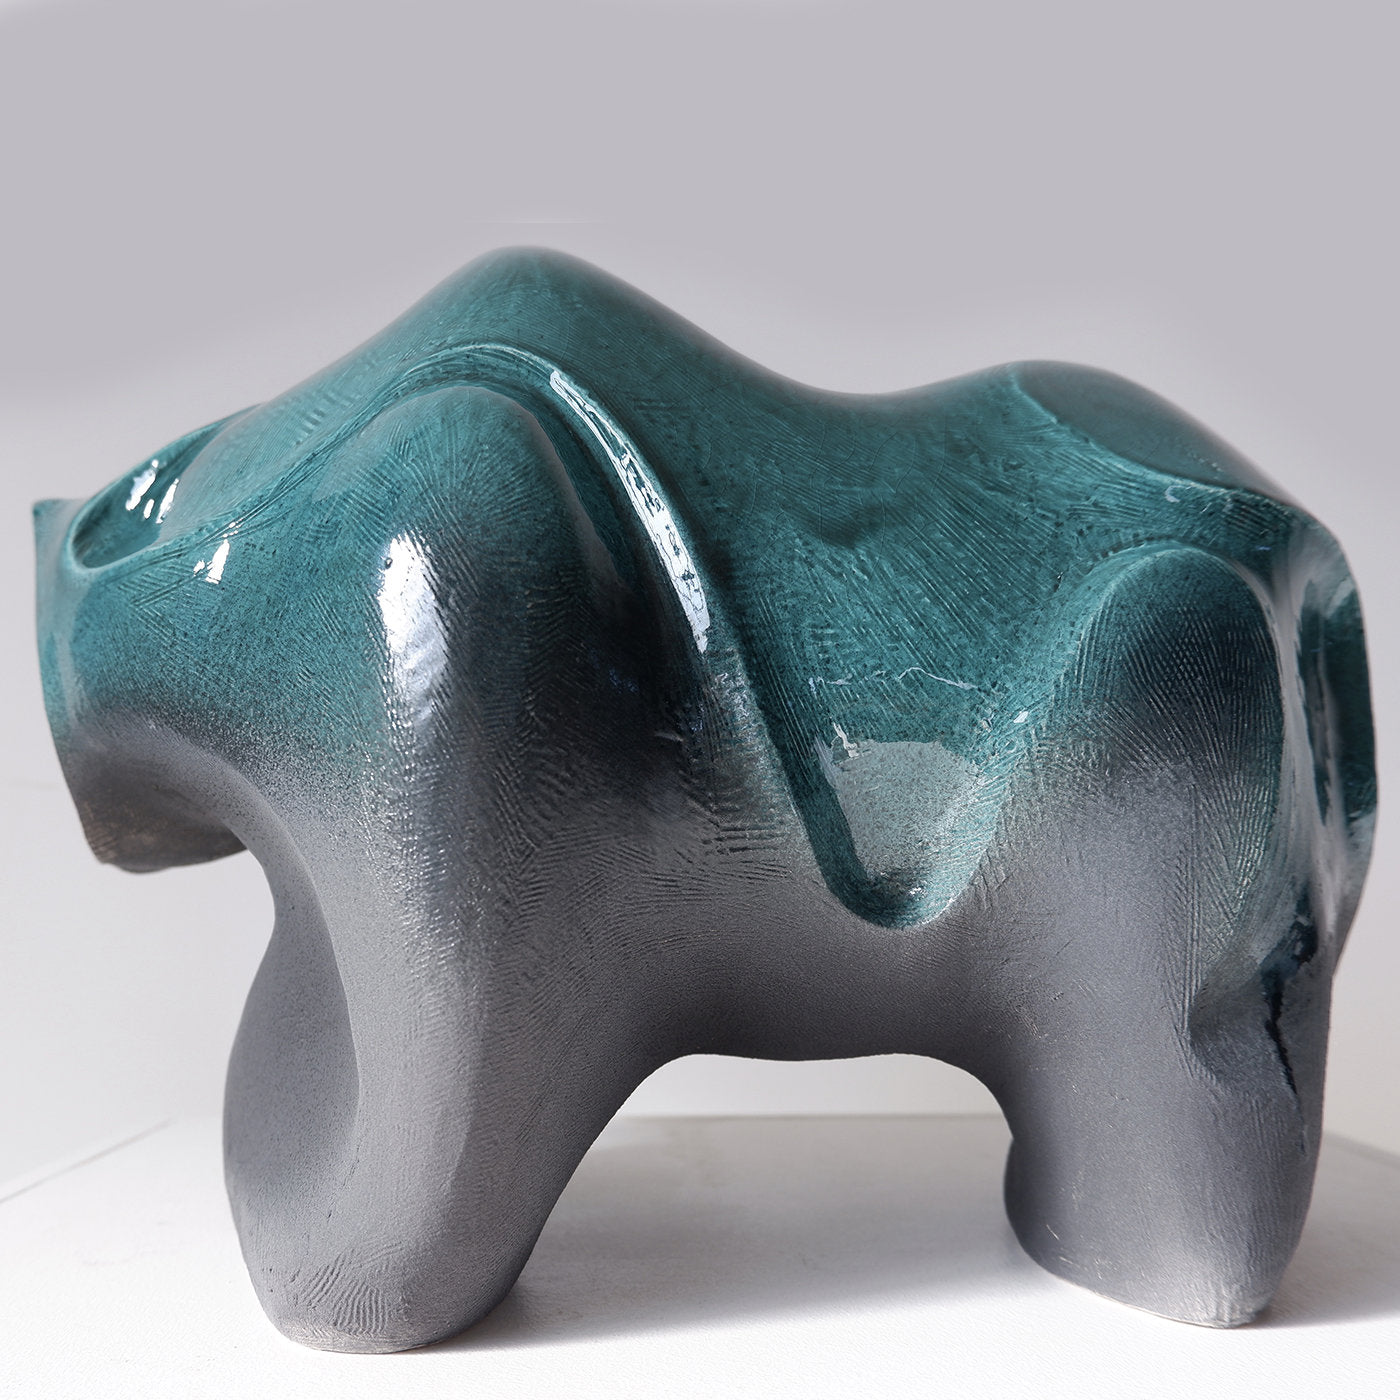 Bear Sculpture in Turquoise - Alternative view 3